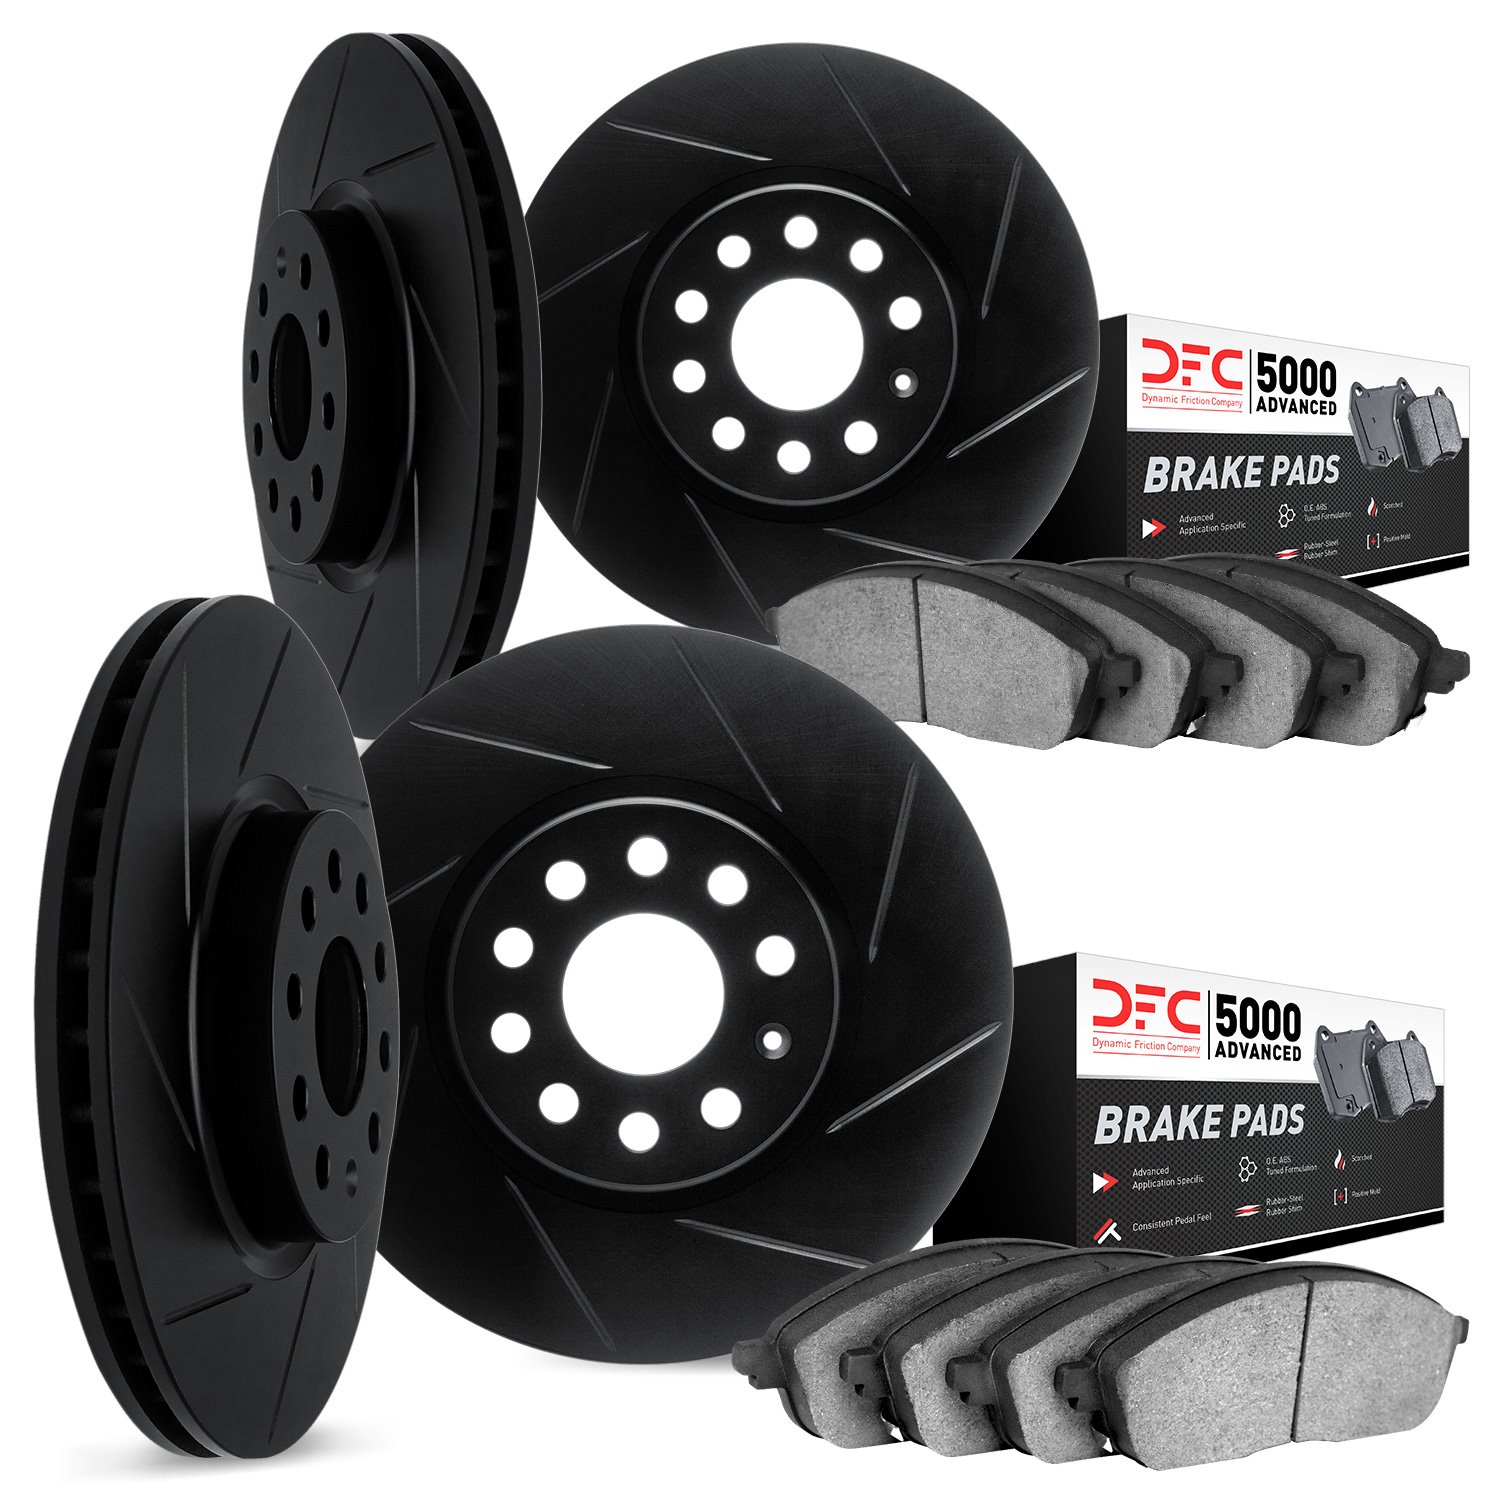 3514-63106 Slotted Brake Rotors w/5000 Advanced Brake Pads Kit & Hardware [Black], 2006-2012 Mercedes-Benz, Position: Front and